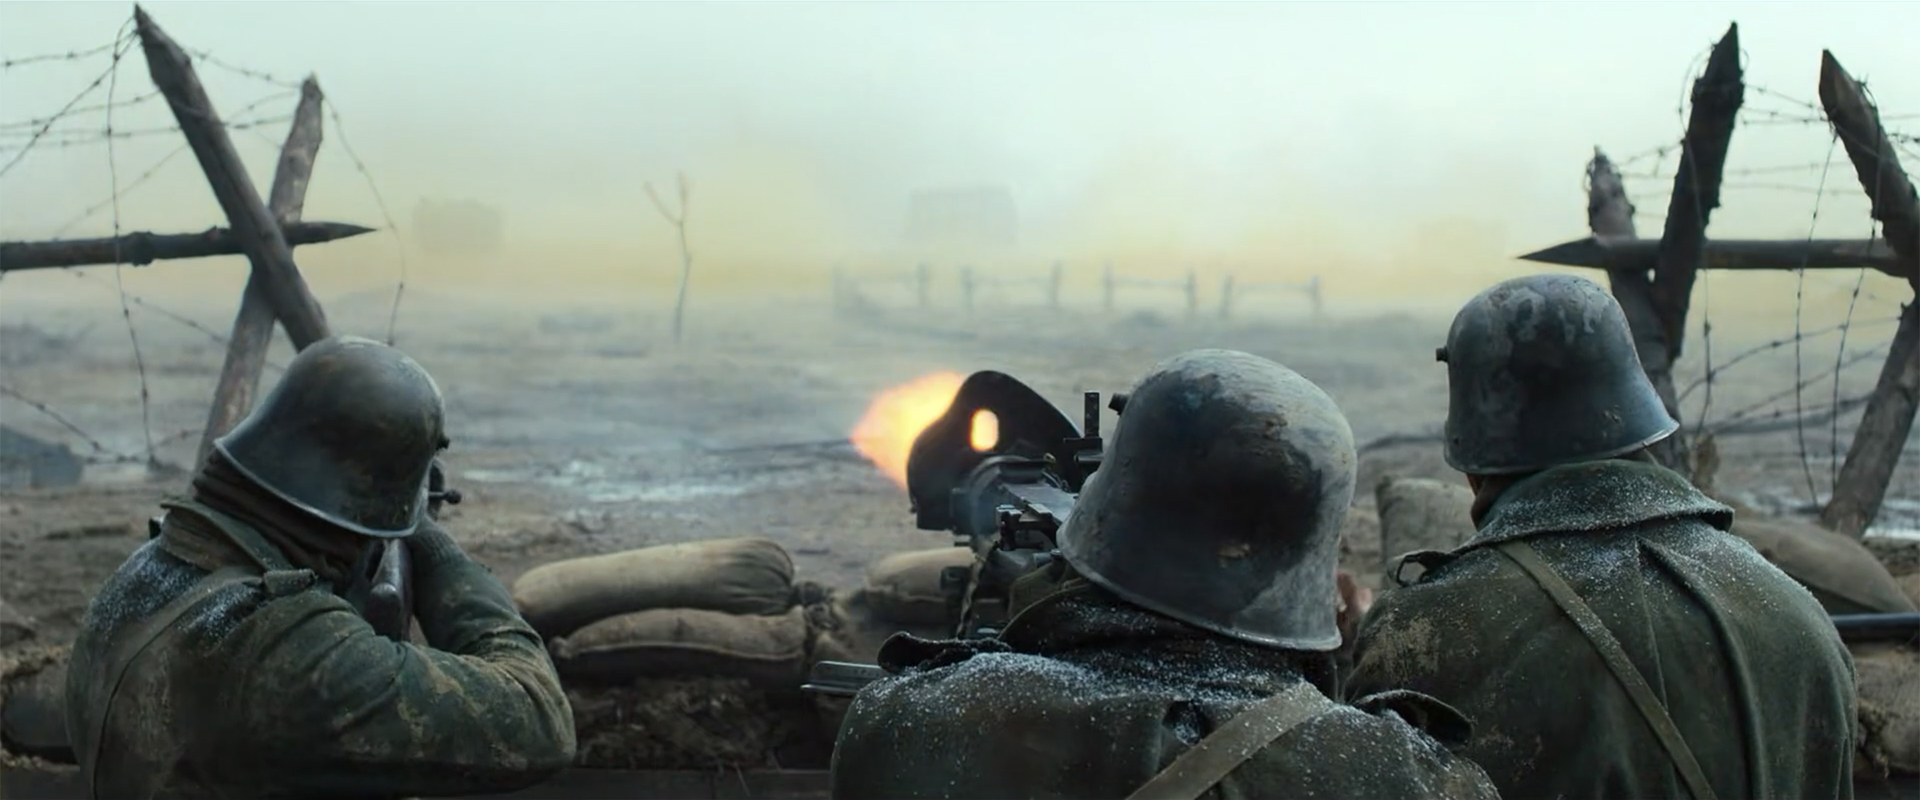 Tanks emerge from the yellow smoke, immersive camera on All Quiet on the Western Front.